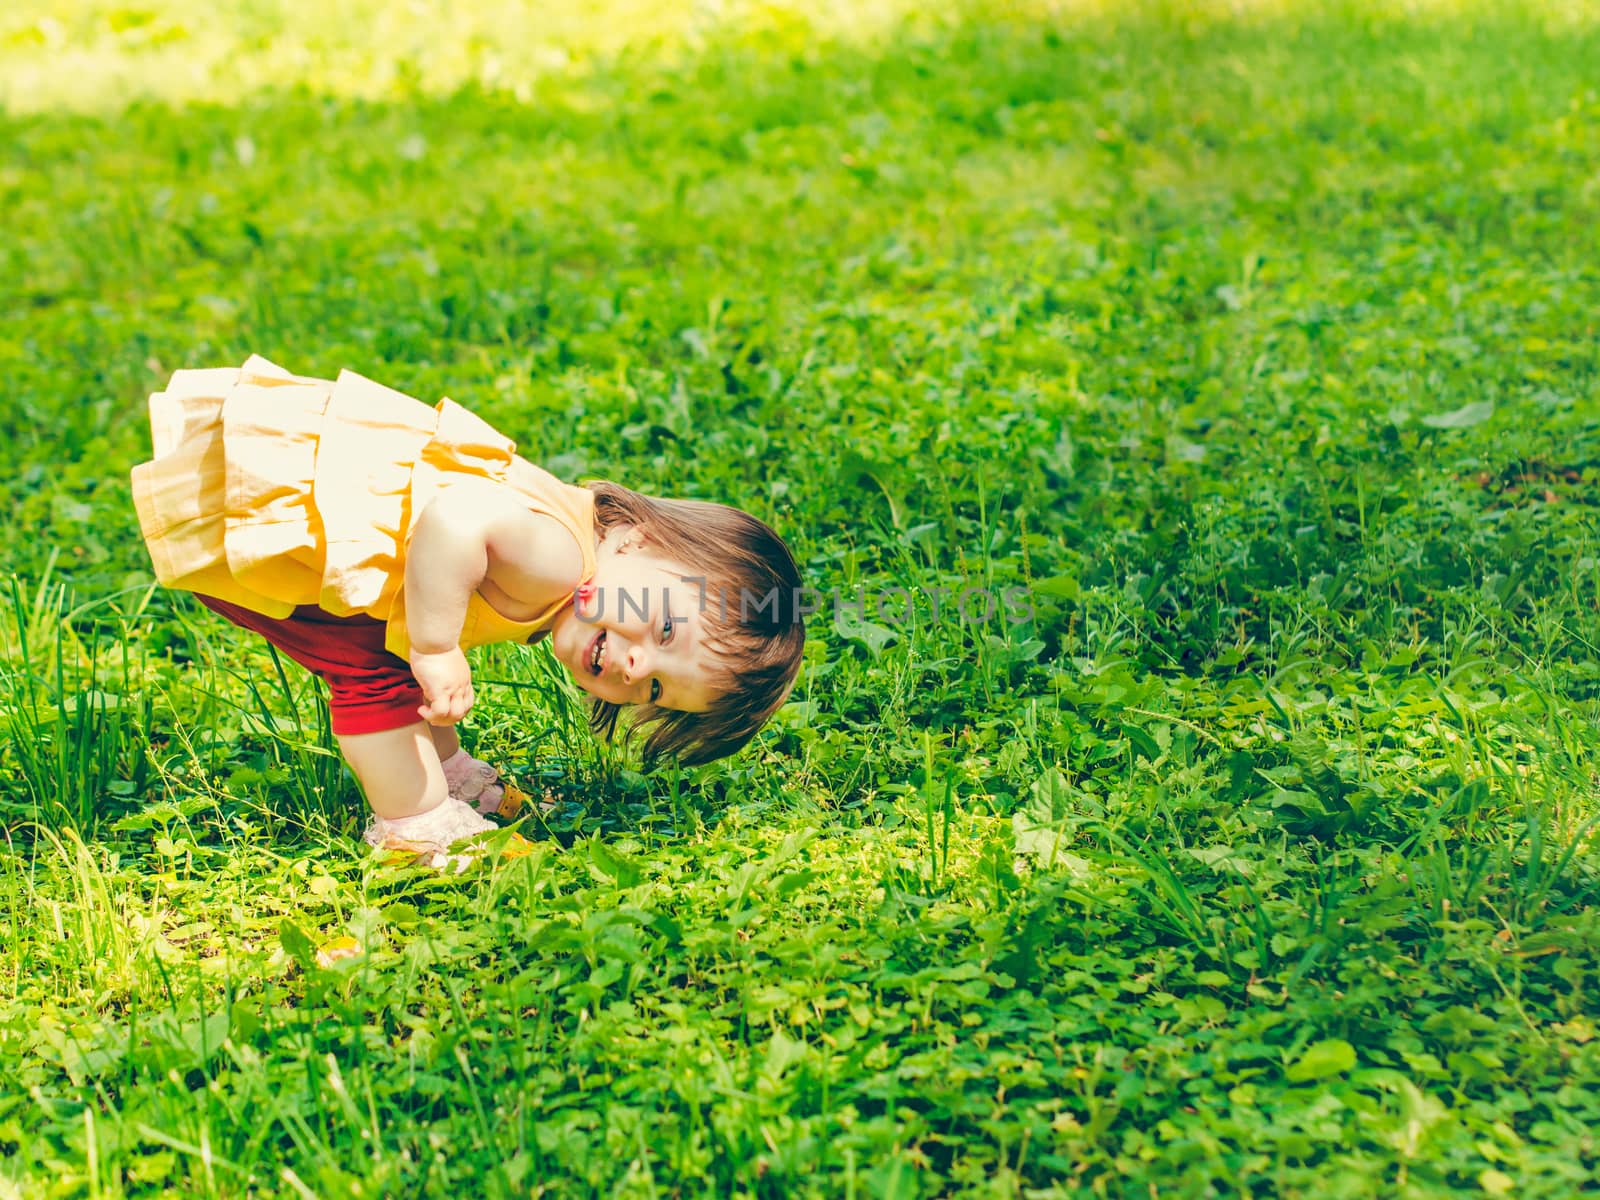 One year baby girl playing upside down outdoors. Adorable little girl image with copy space for your text